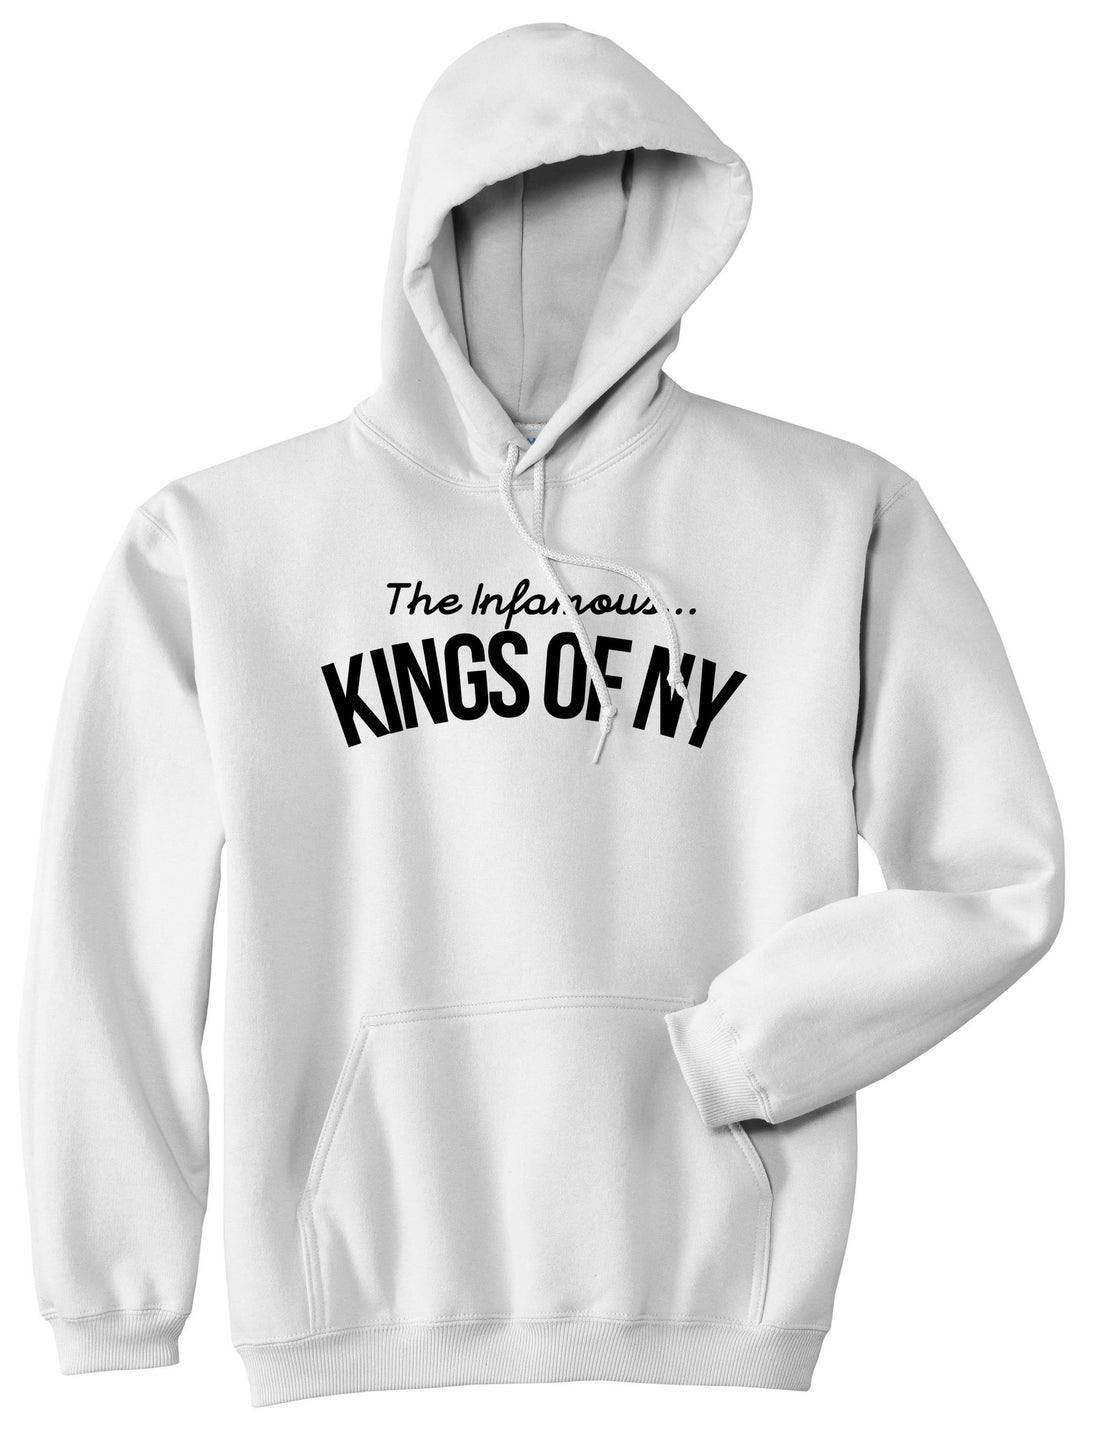 The Infamous Kings Of NY Pullover Hoodie in White By Kings Of NY